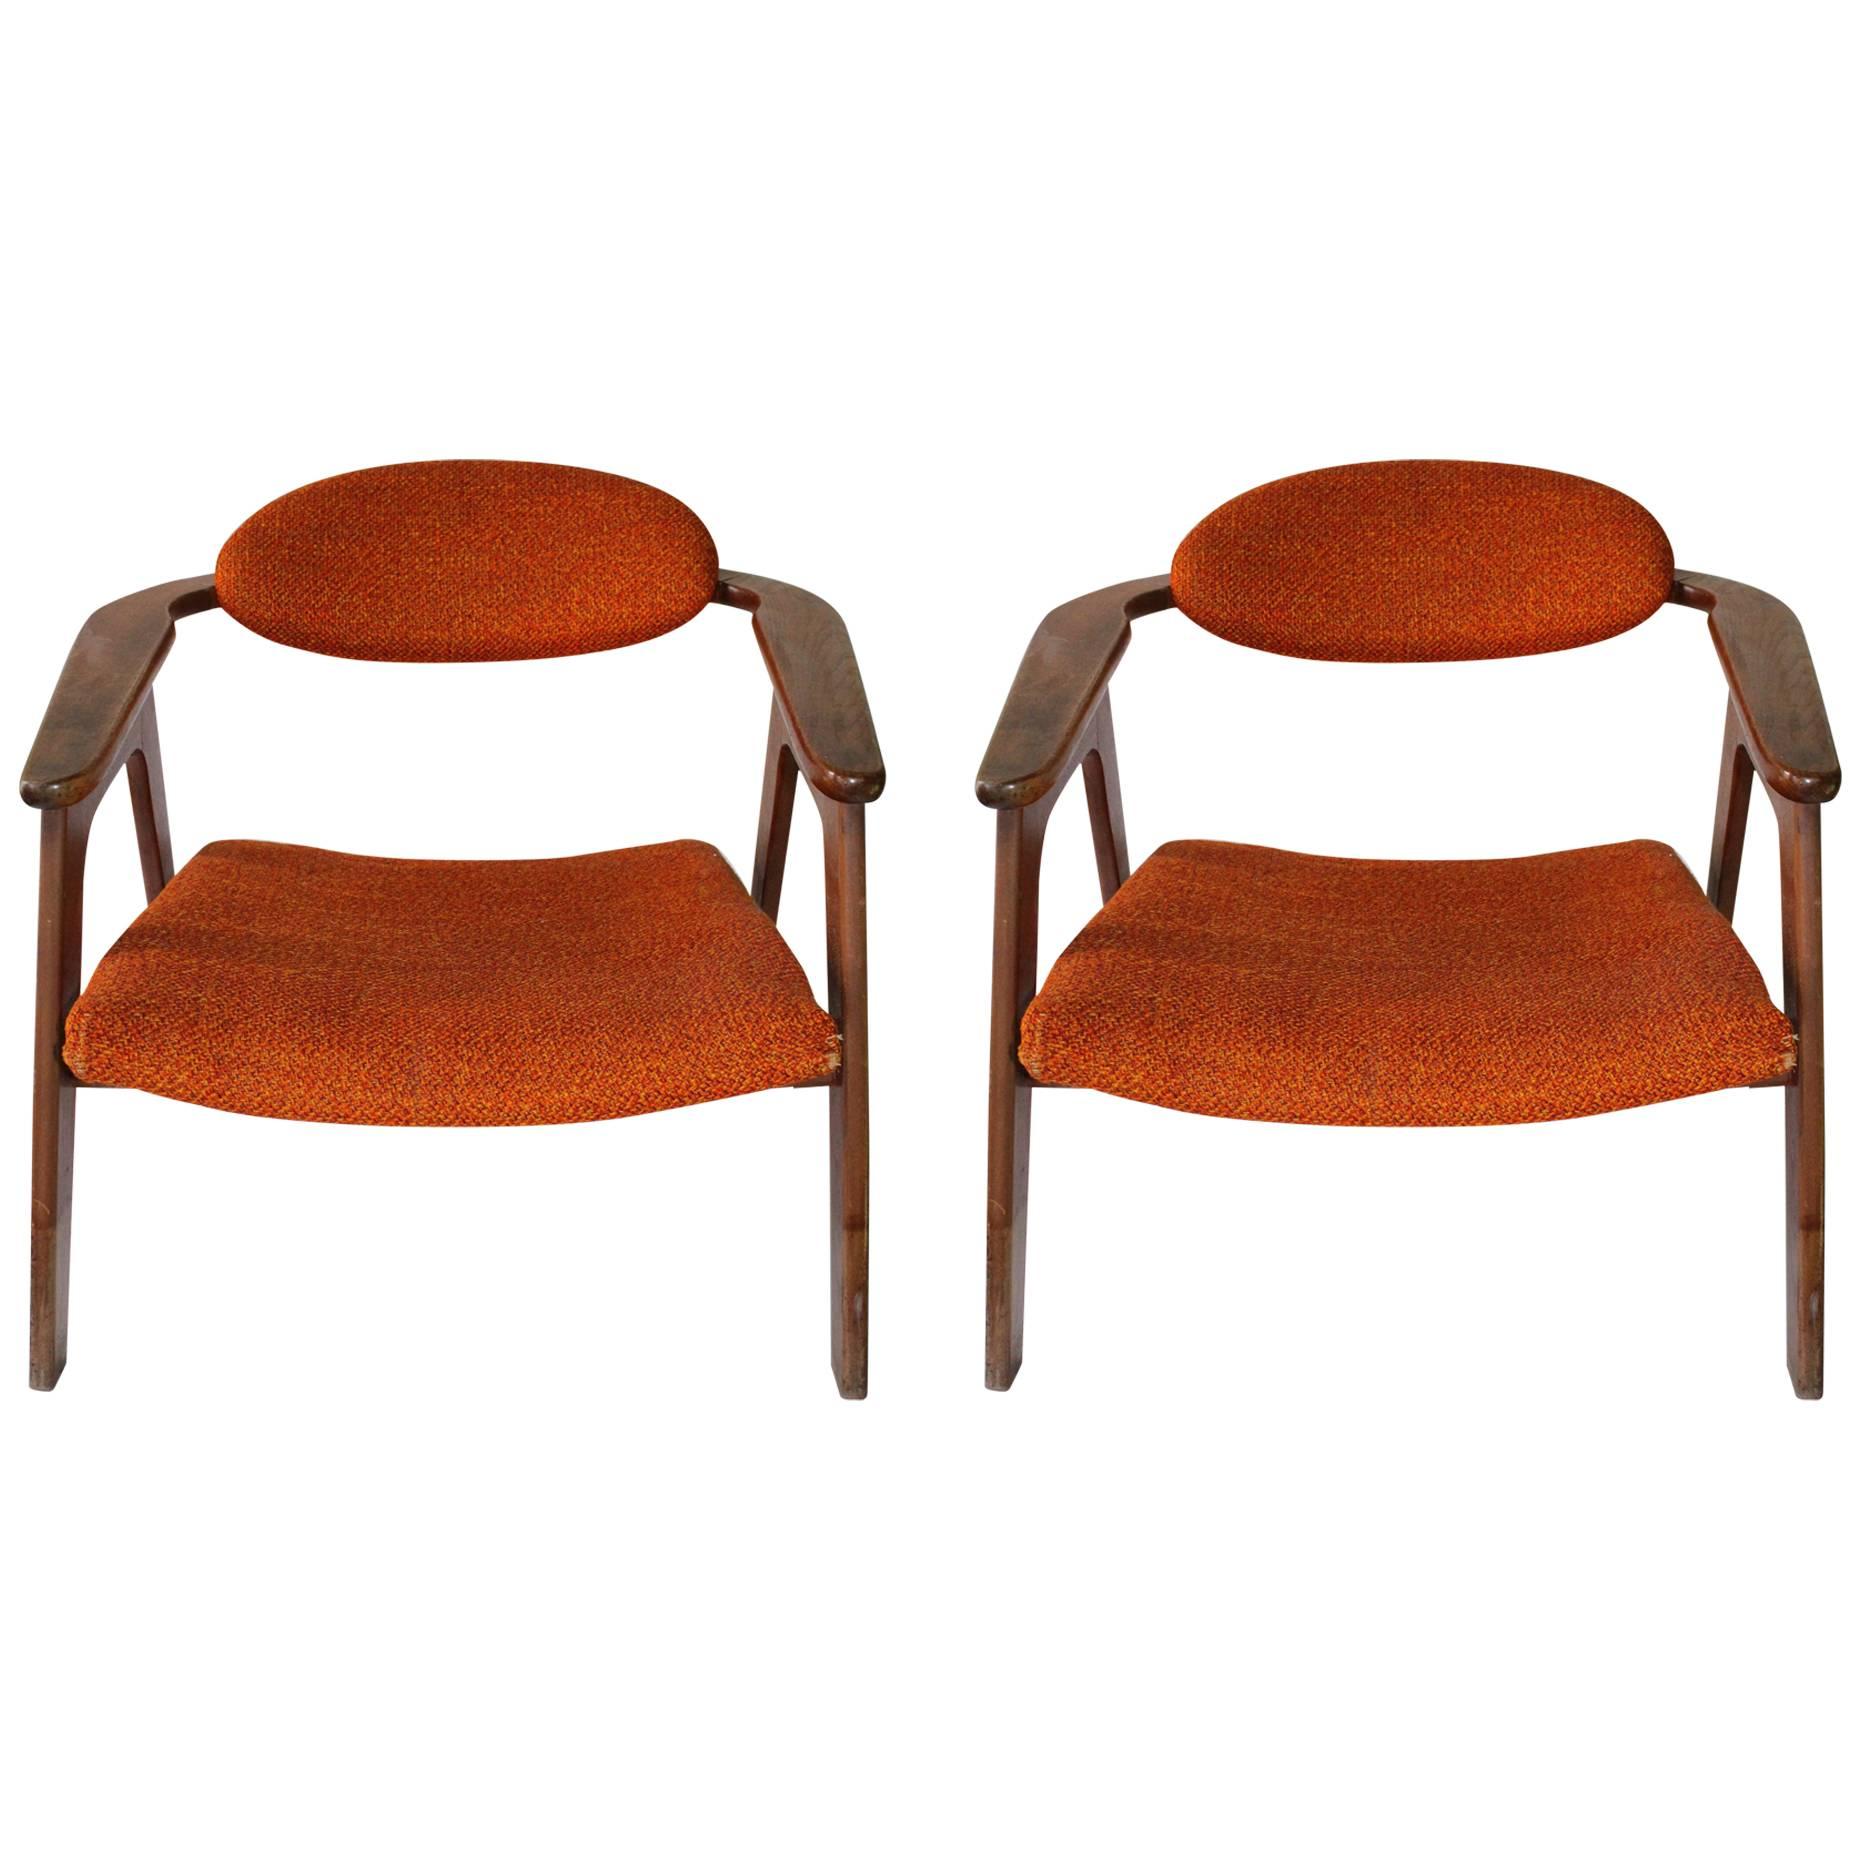 Pair of Adrian Pearsall, 1950s 'Captain's Chairs'